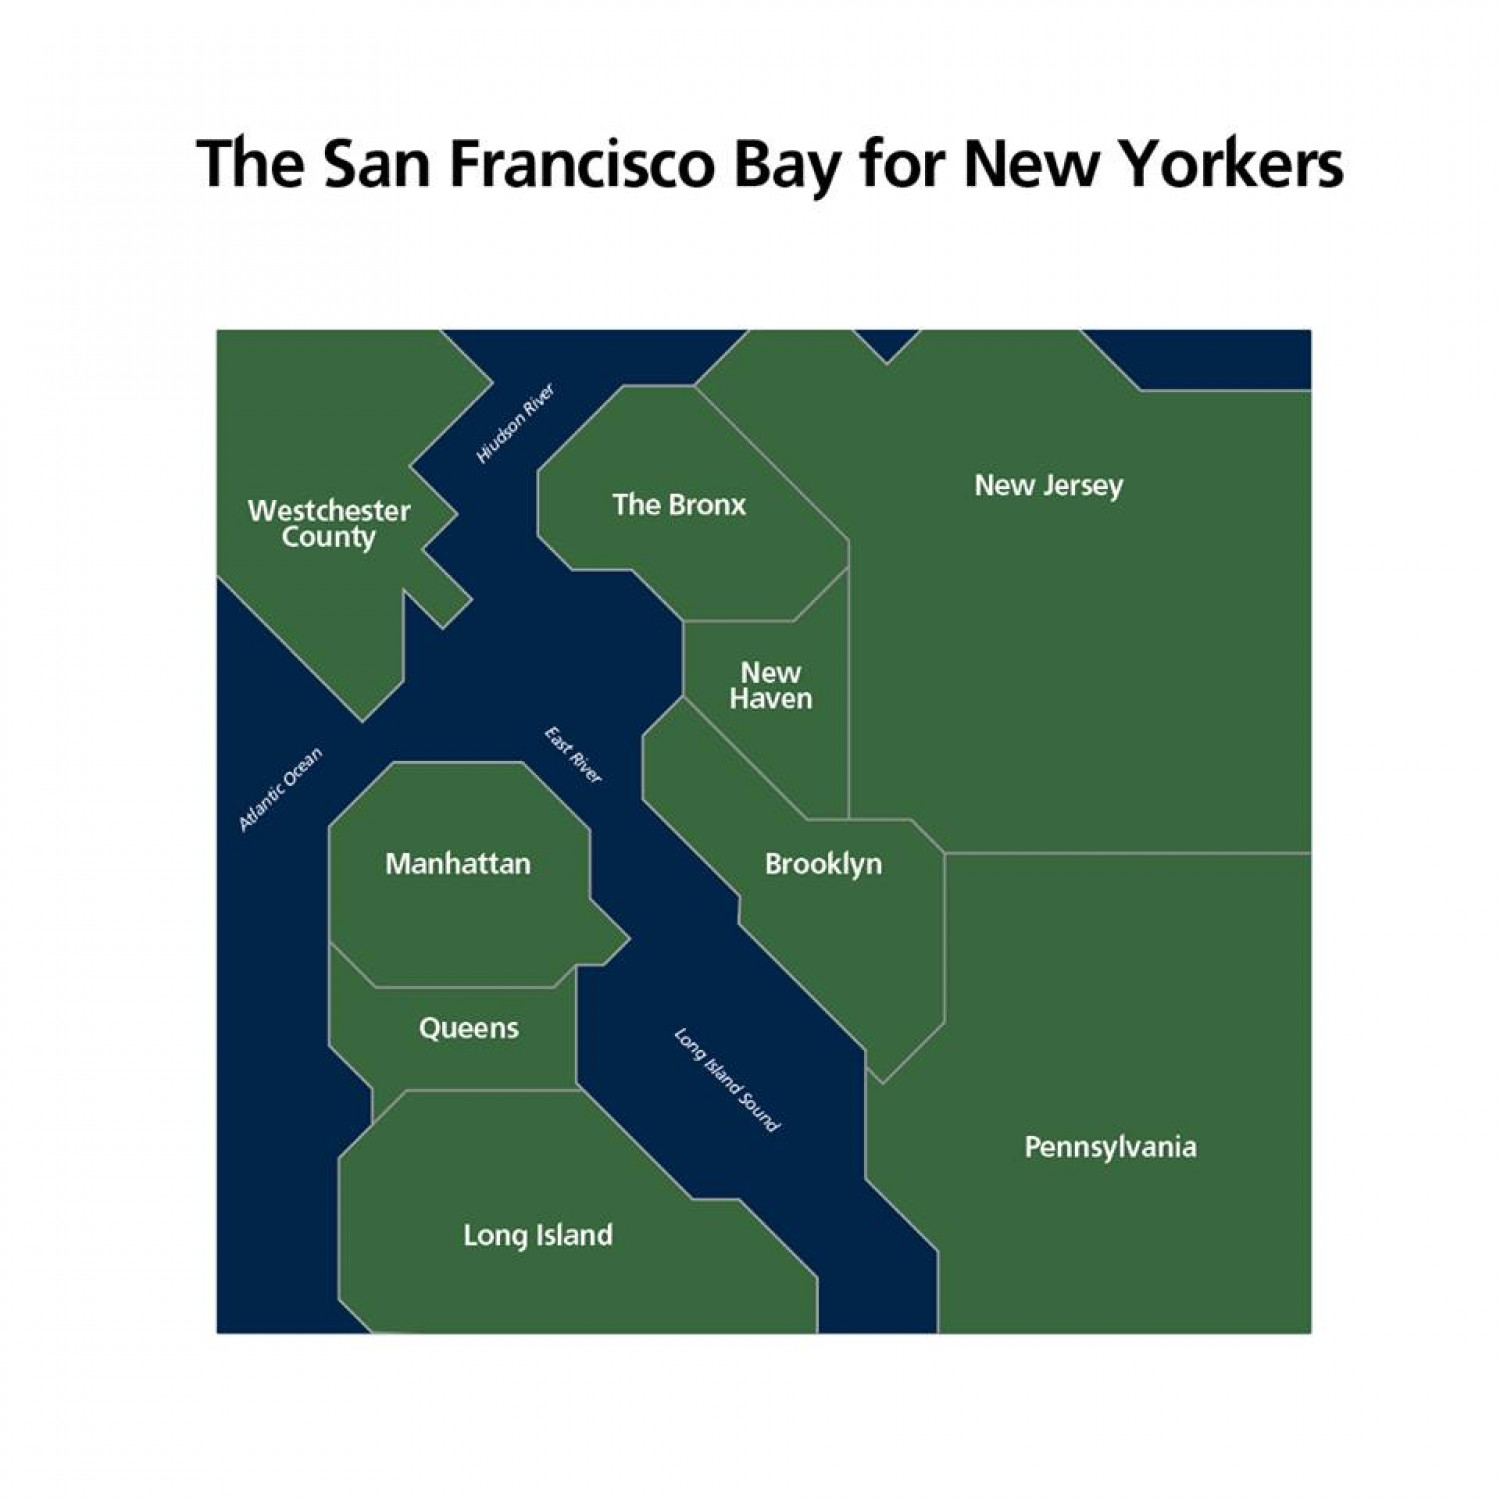 The San Francisco Bay for New Yorkers Infographic